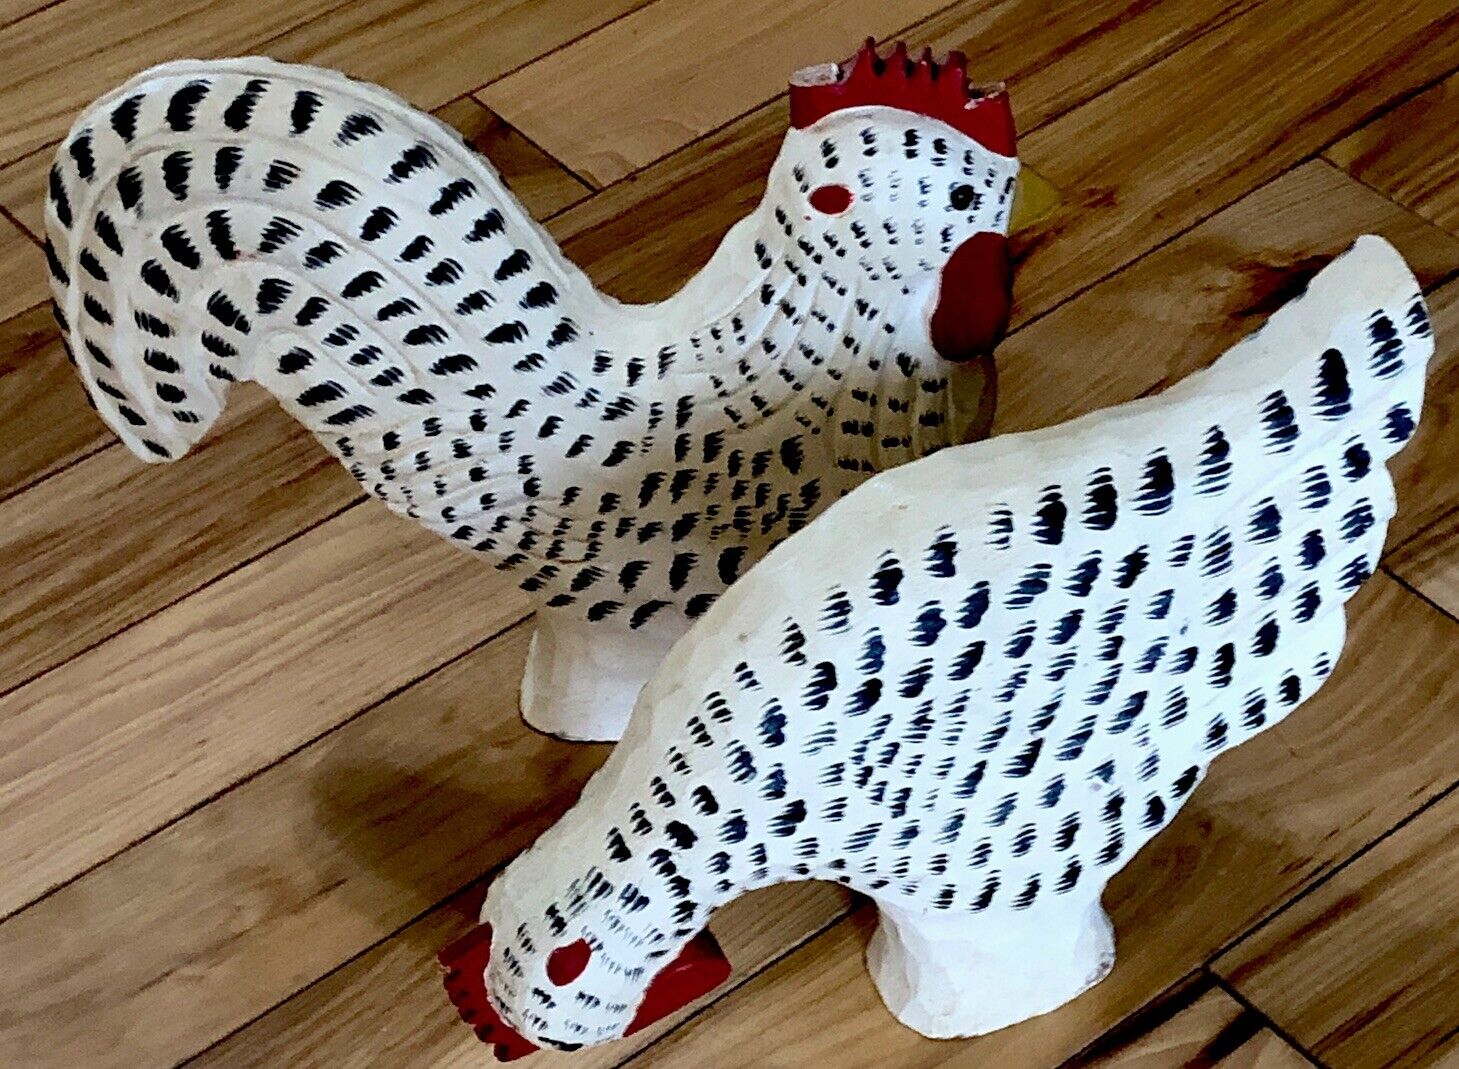 James Haddon Folk Art -Two Roosters Signed by artist